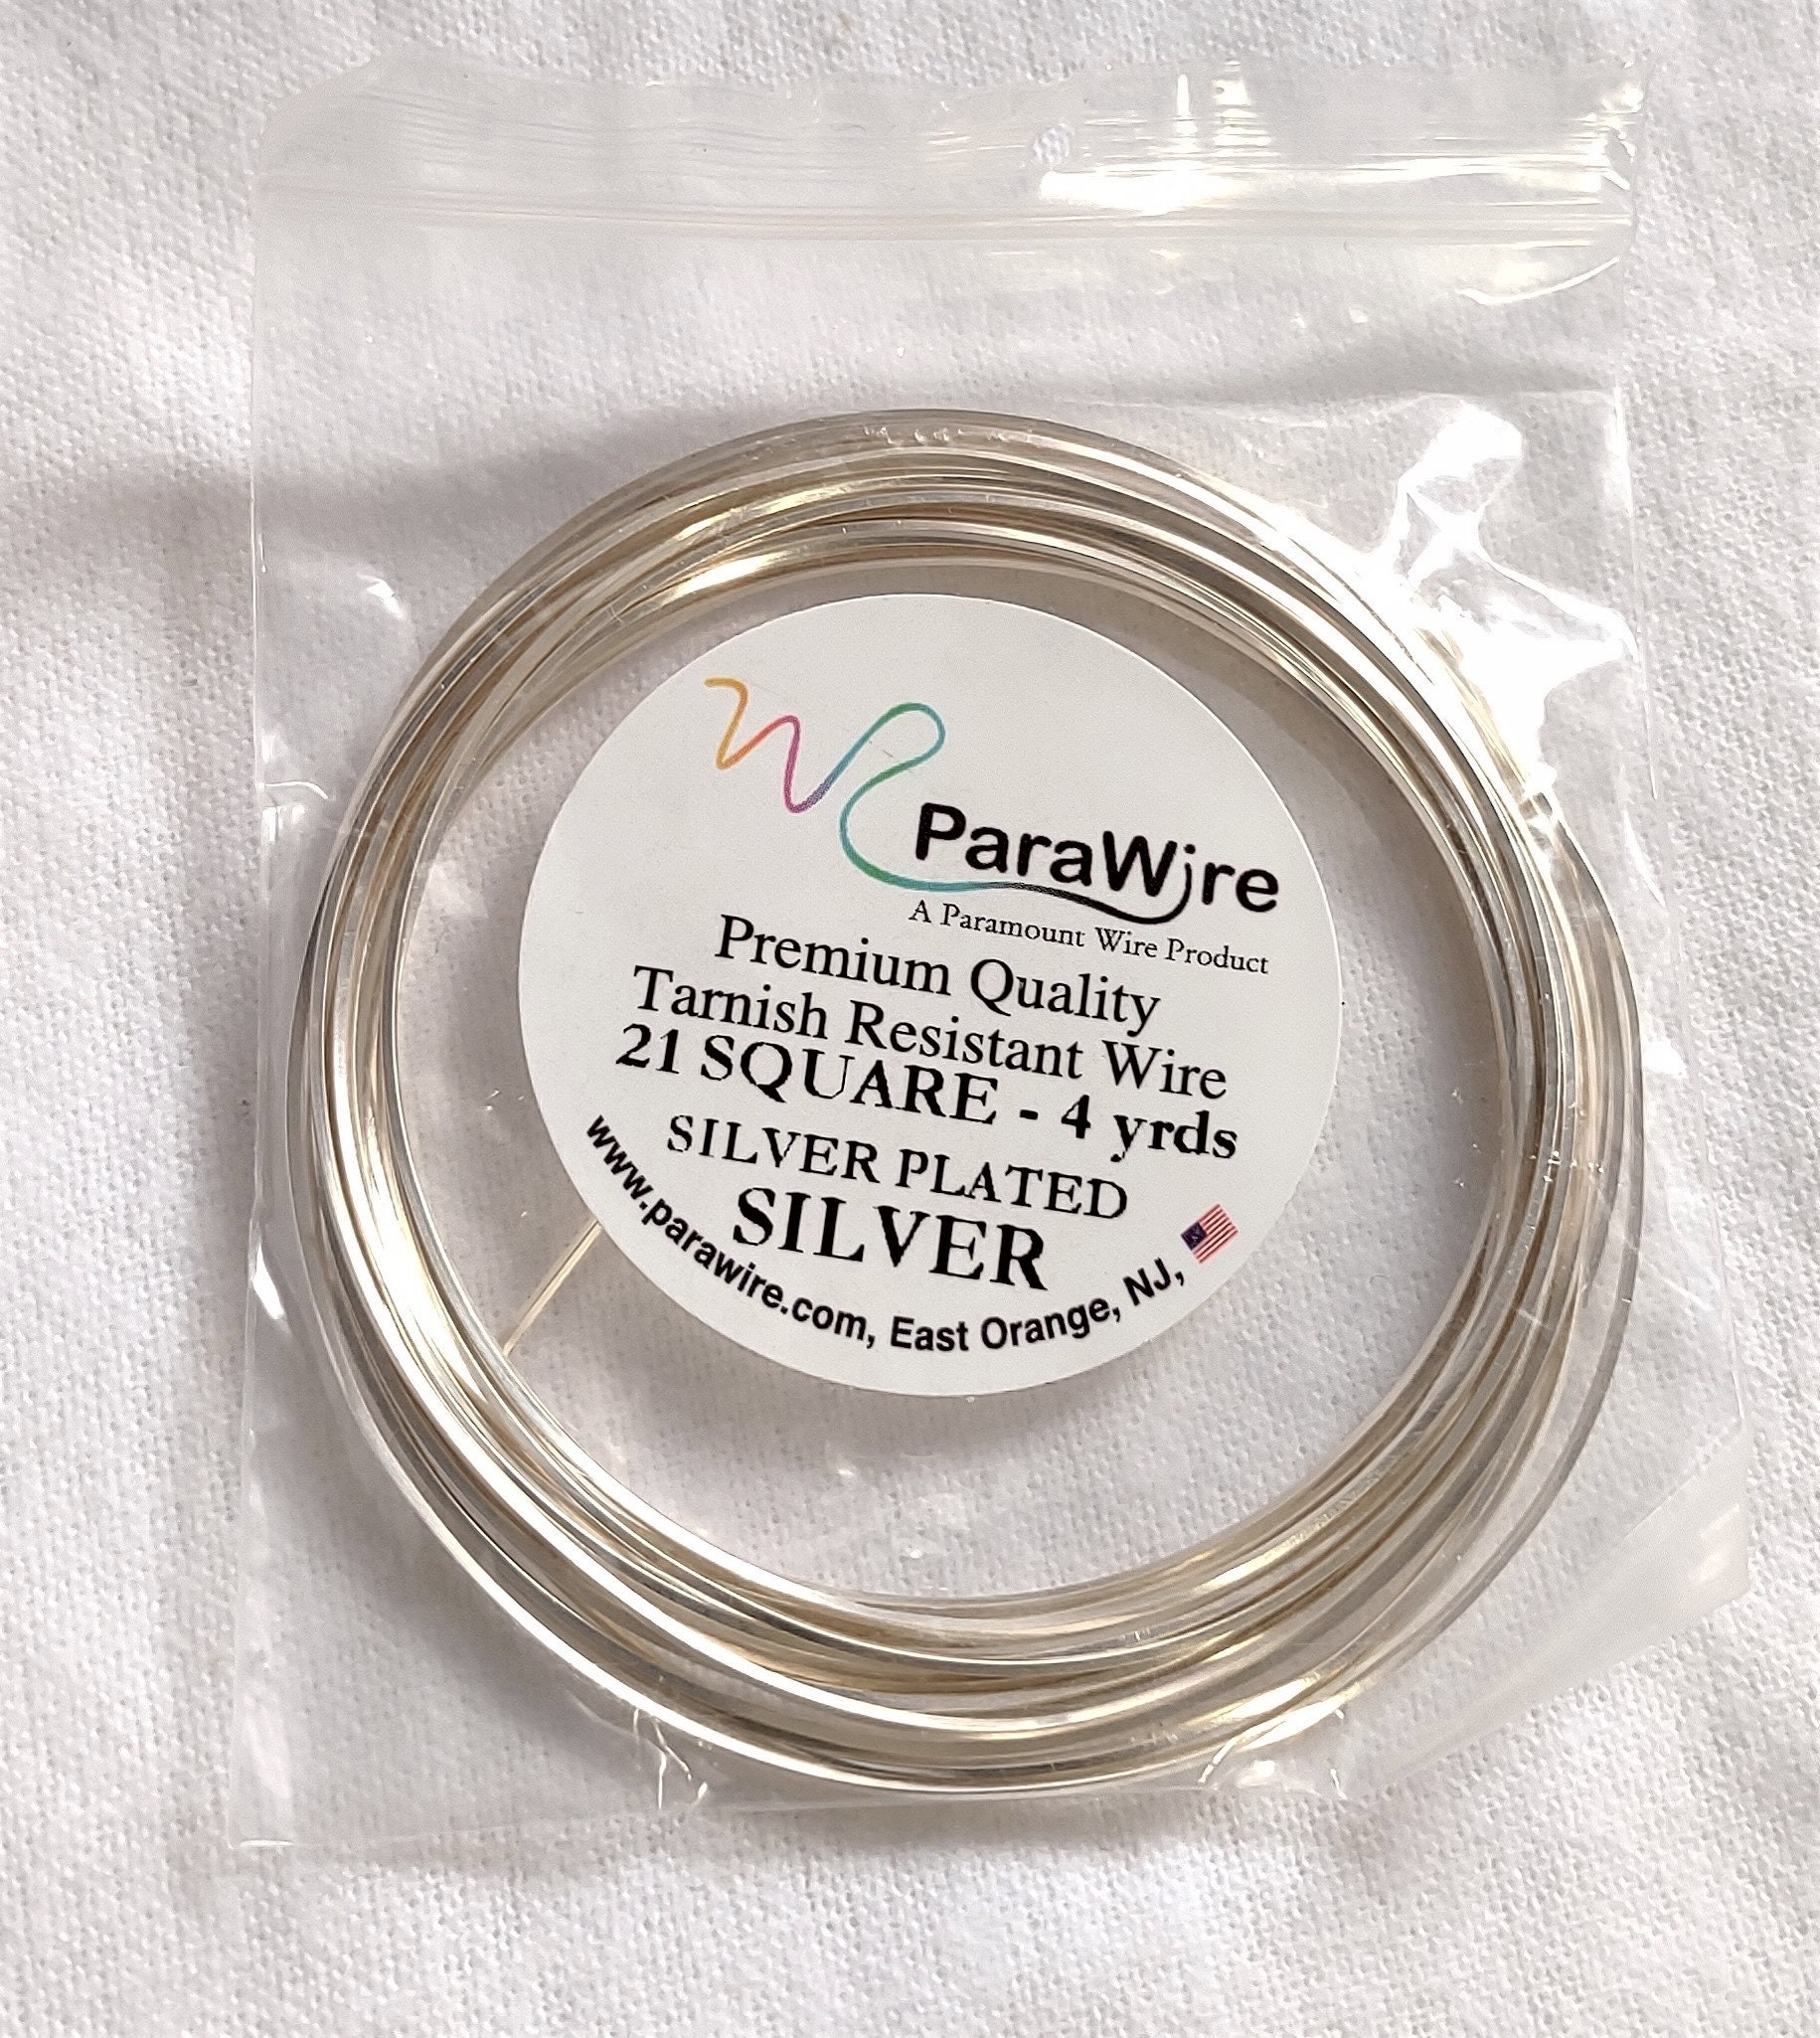 21 Gauge HALF ROUND SILVER Silver Plated Wire Tarnish Resistant Parawire 